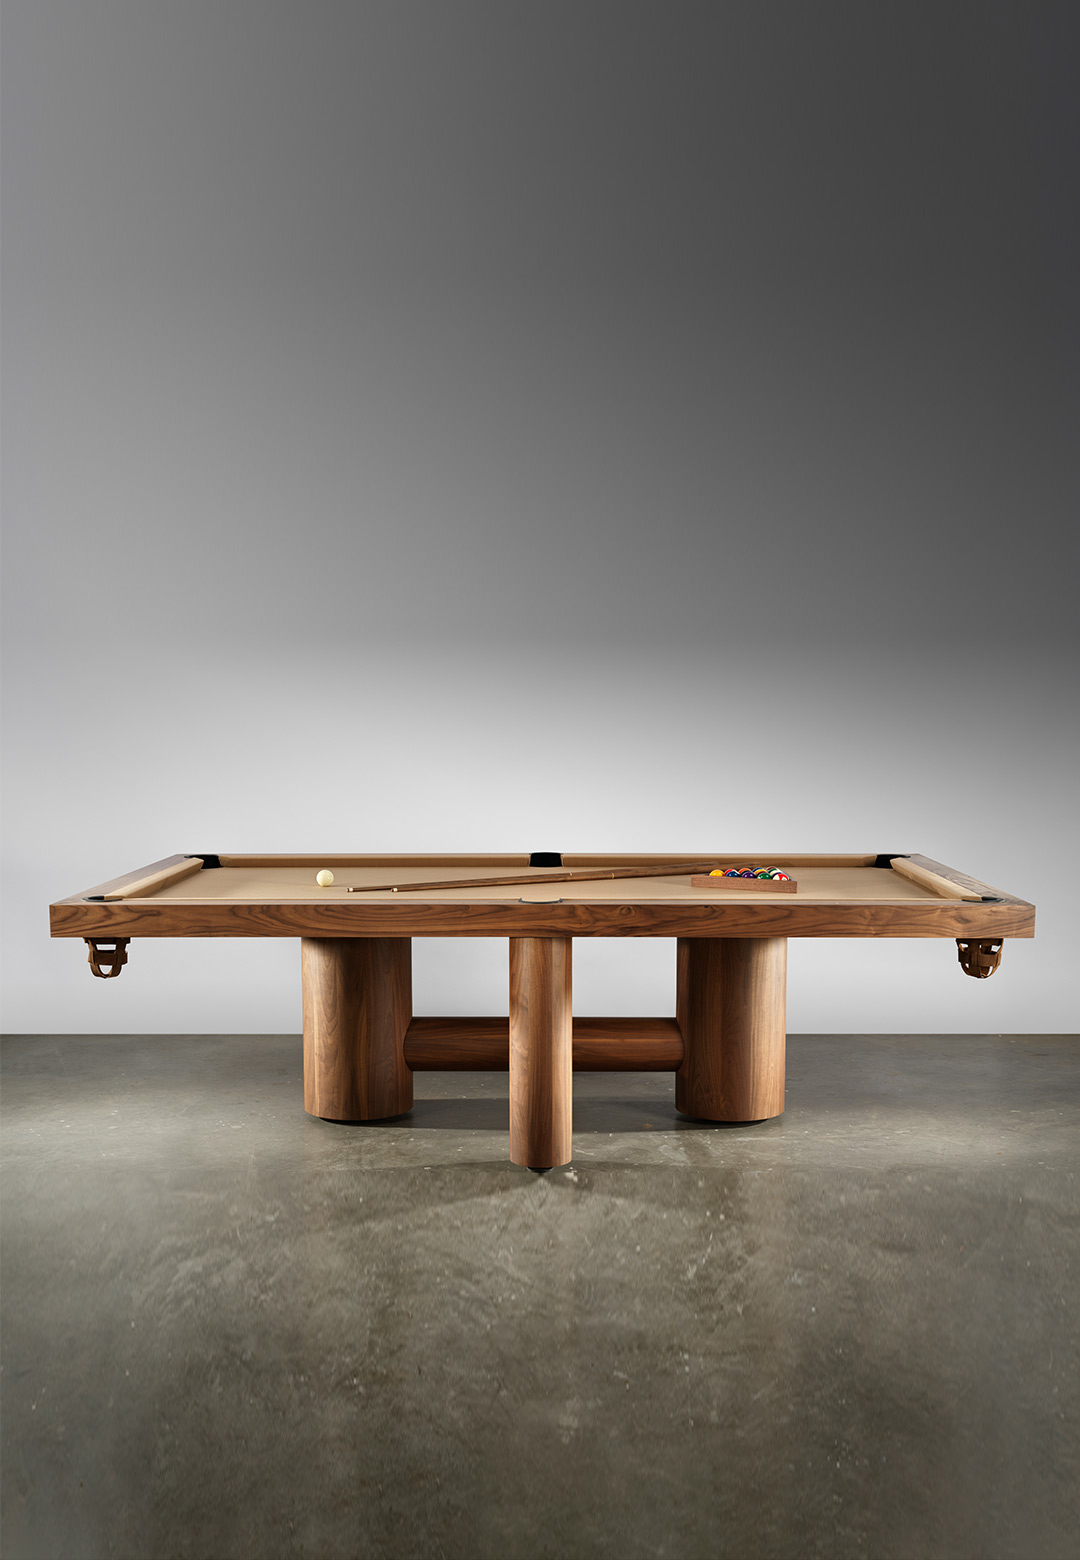 'ARA Pool Table' by Tim Vranken is an innovative take on traditional pool tables